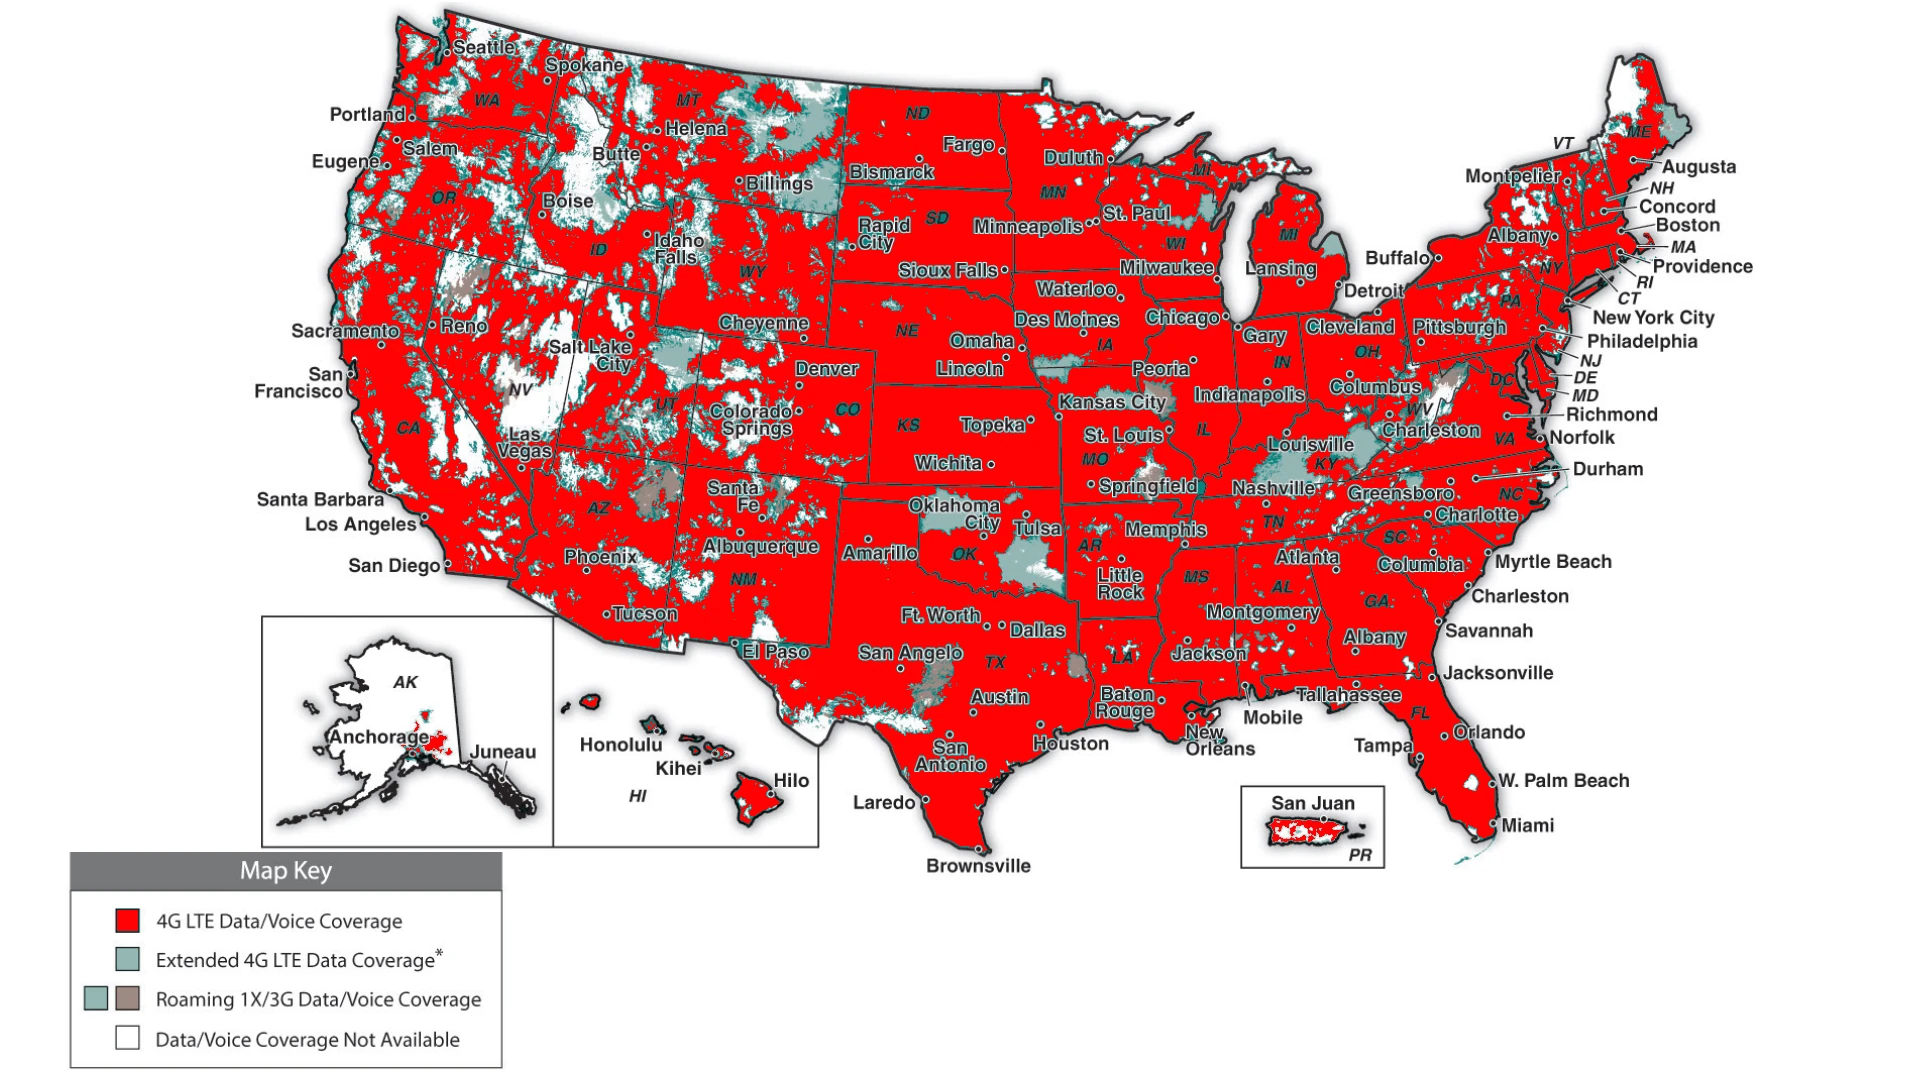 boom! RED Network Coverage Map